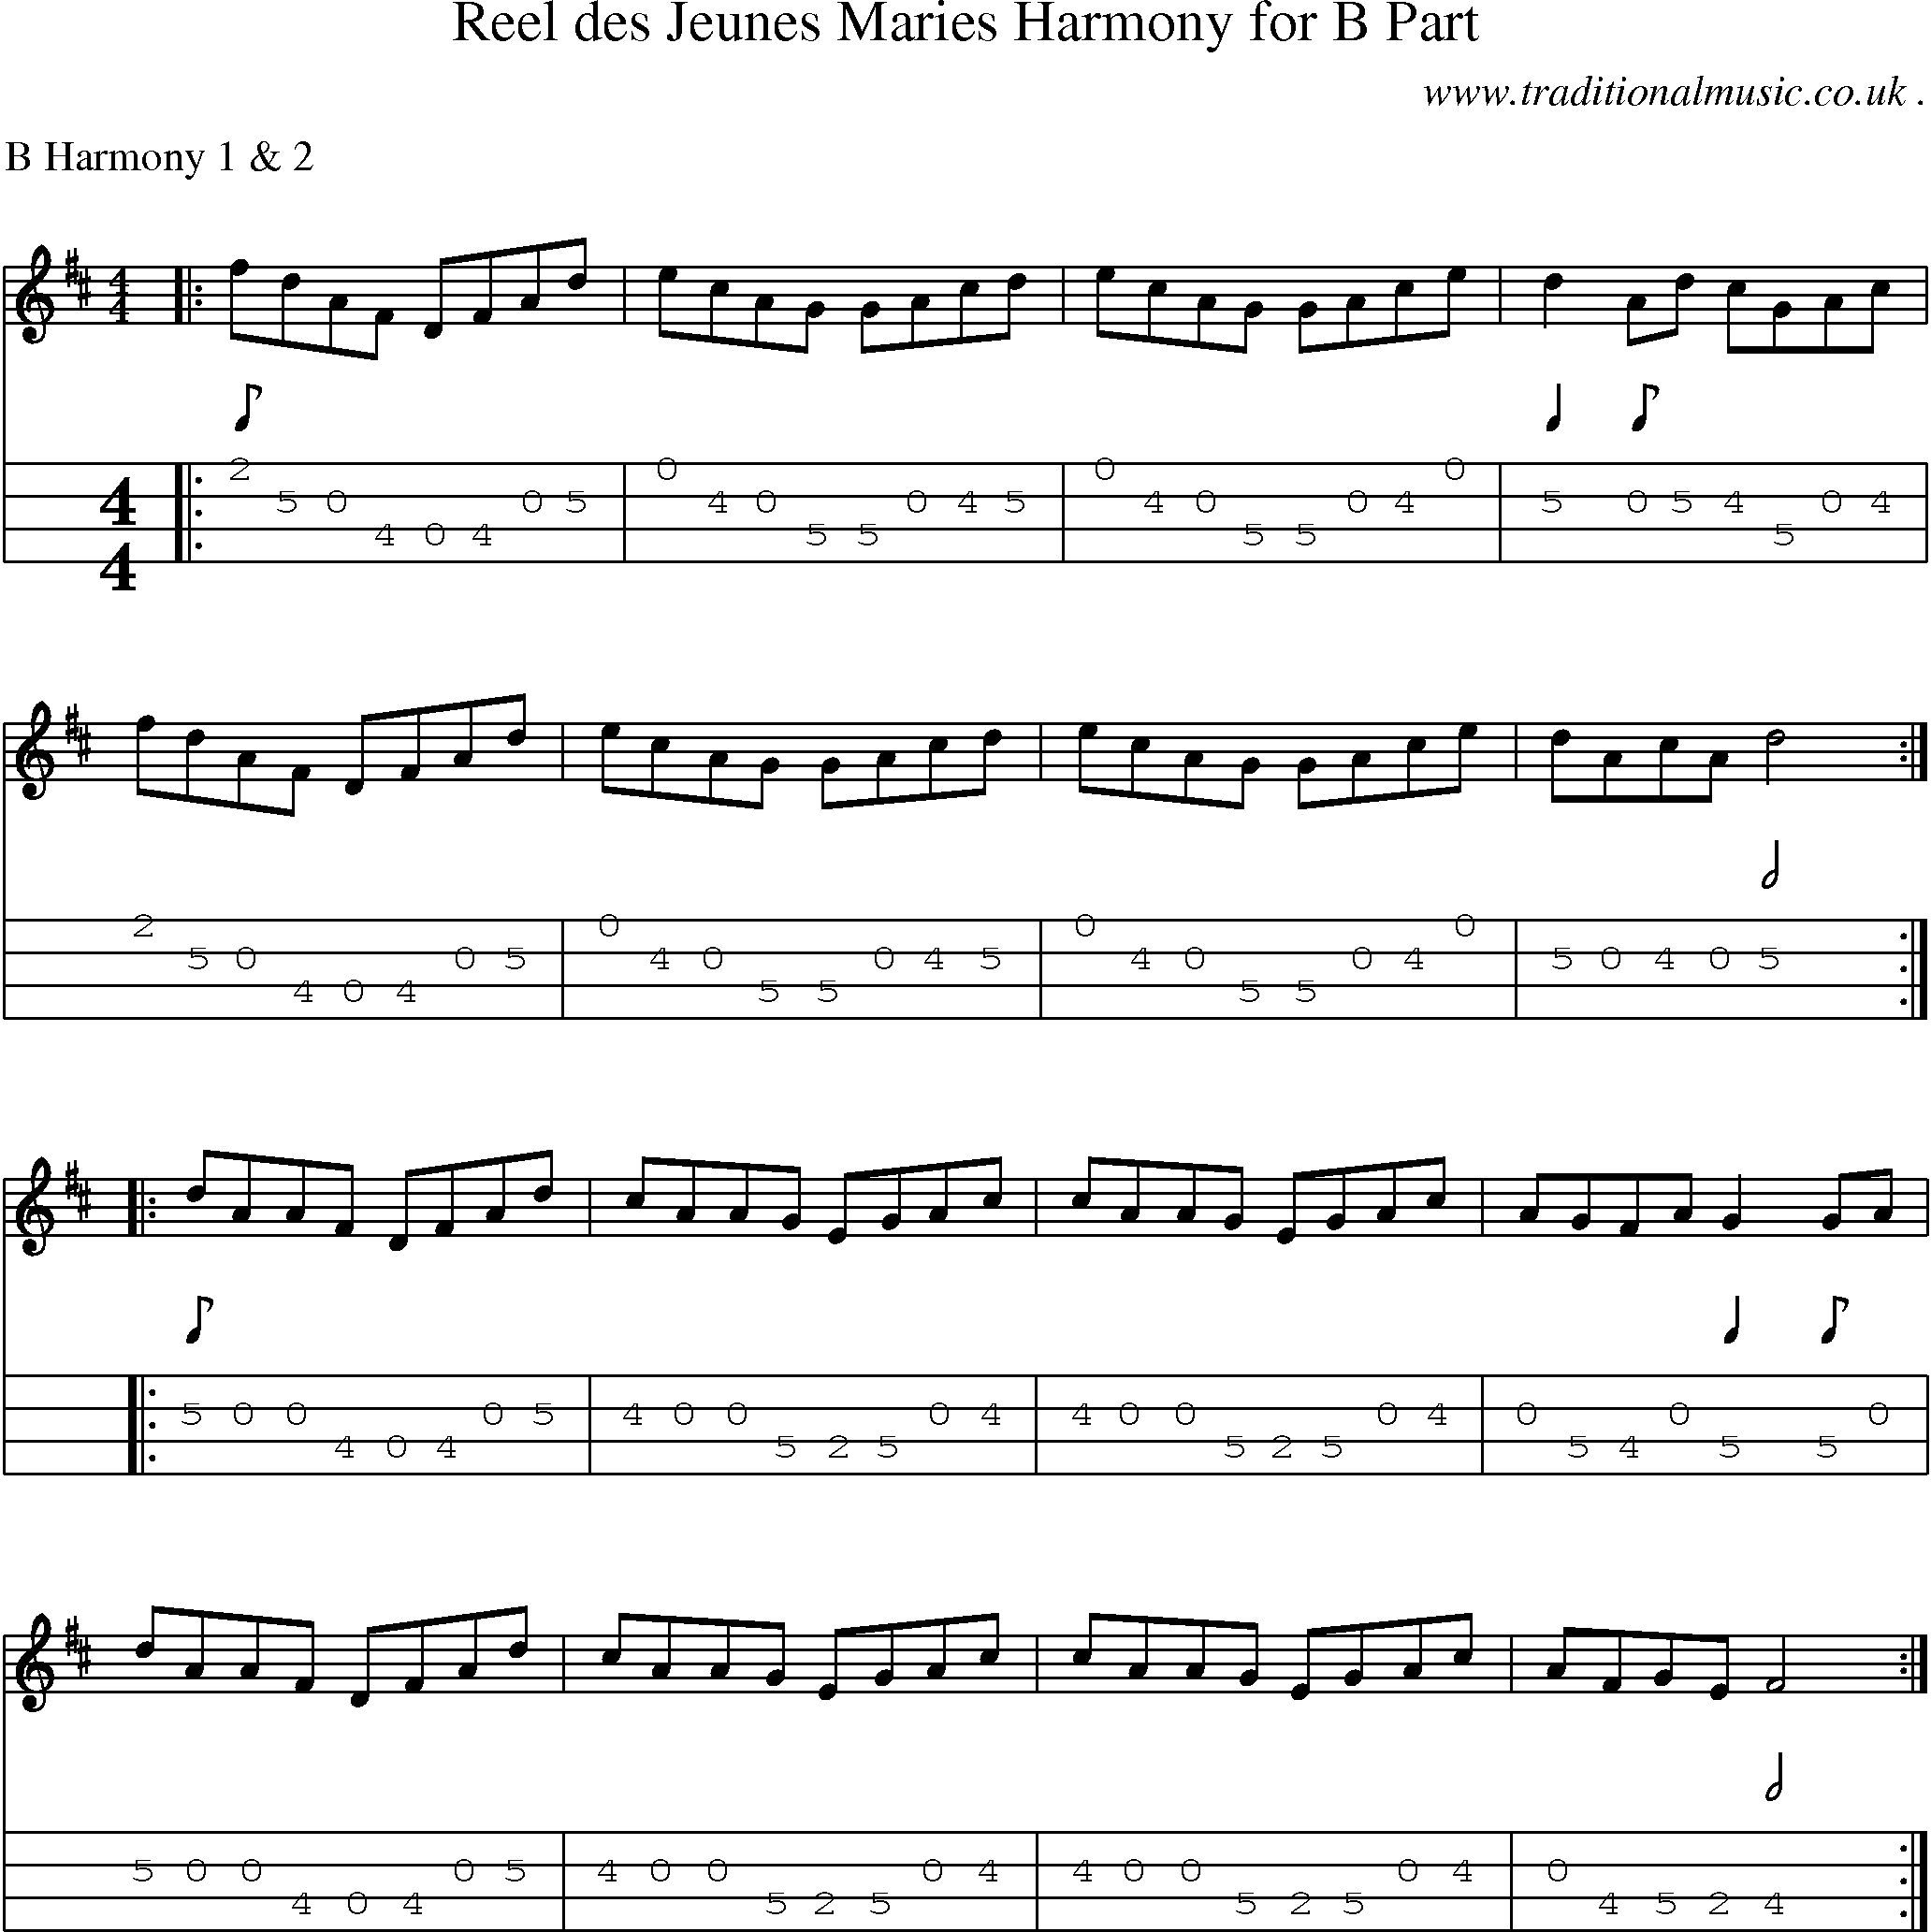 Music Score and Guitar Tabs for Reel Des Jeunes Maries Harmony For B Part